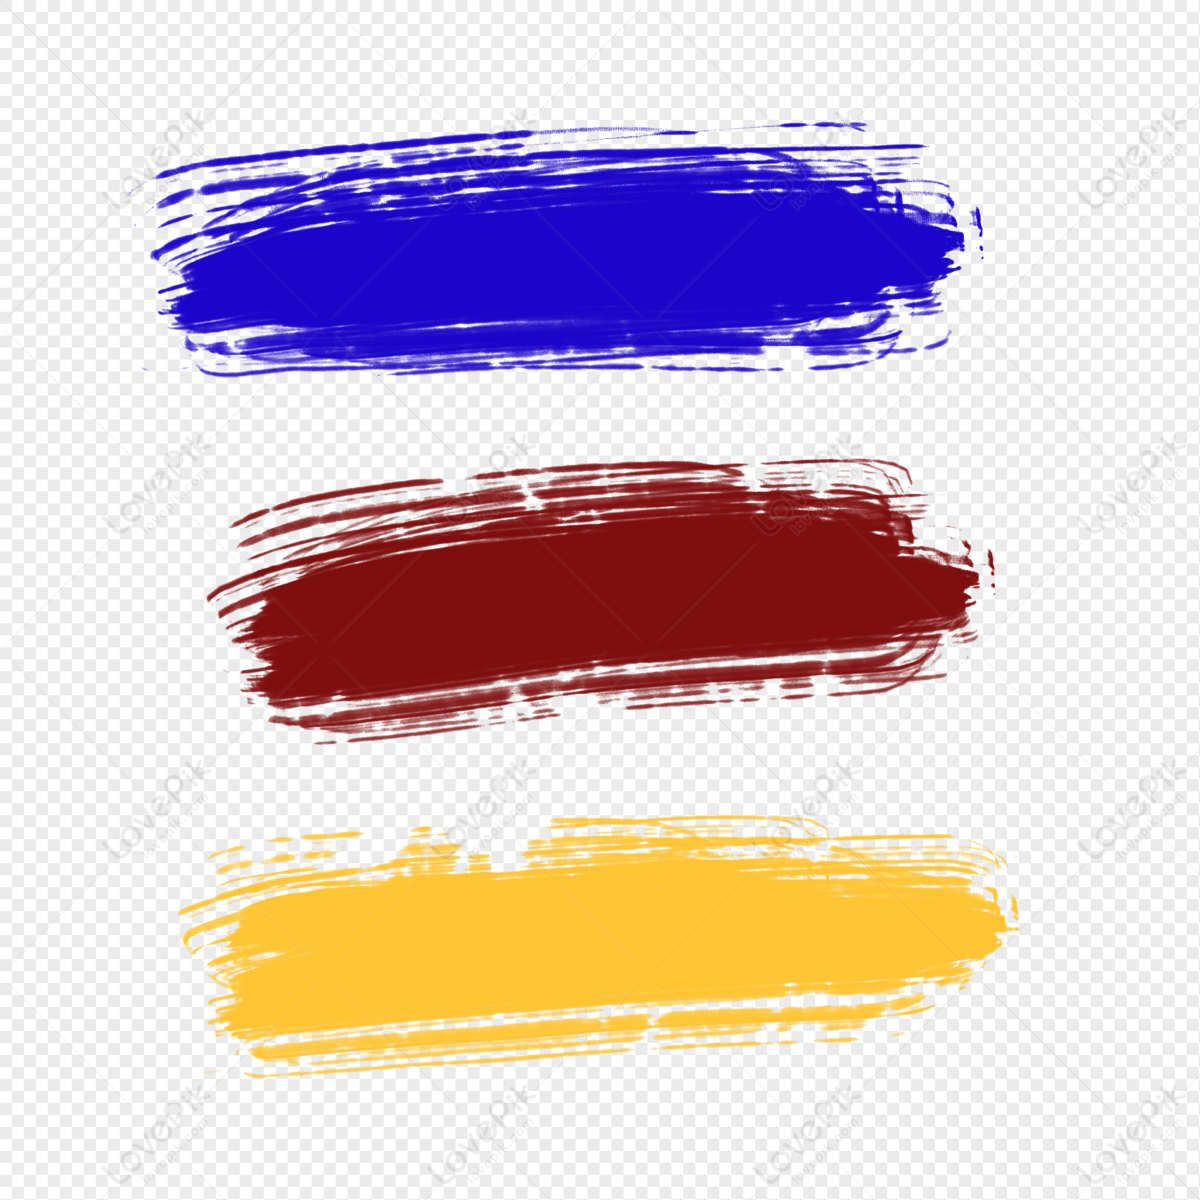 colored sticky note png